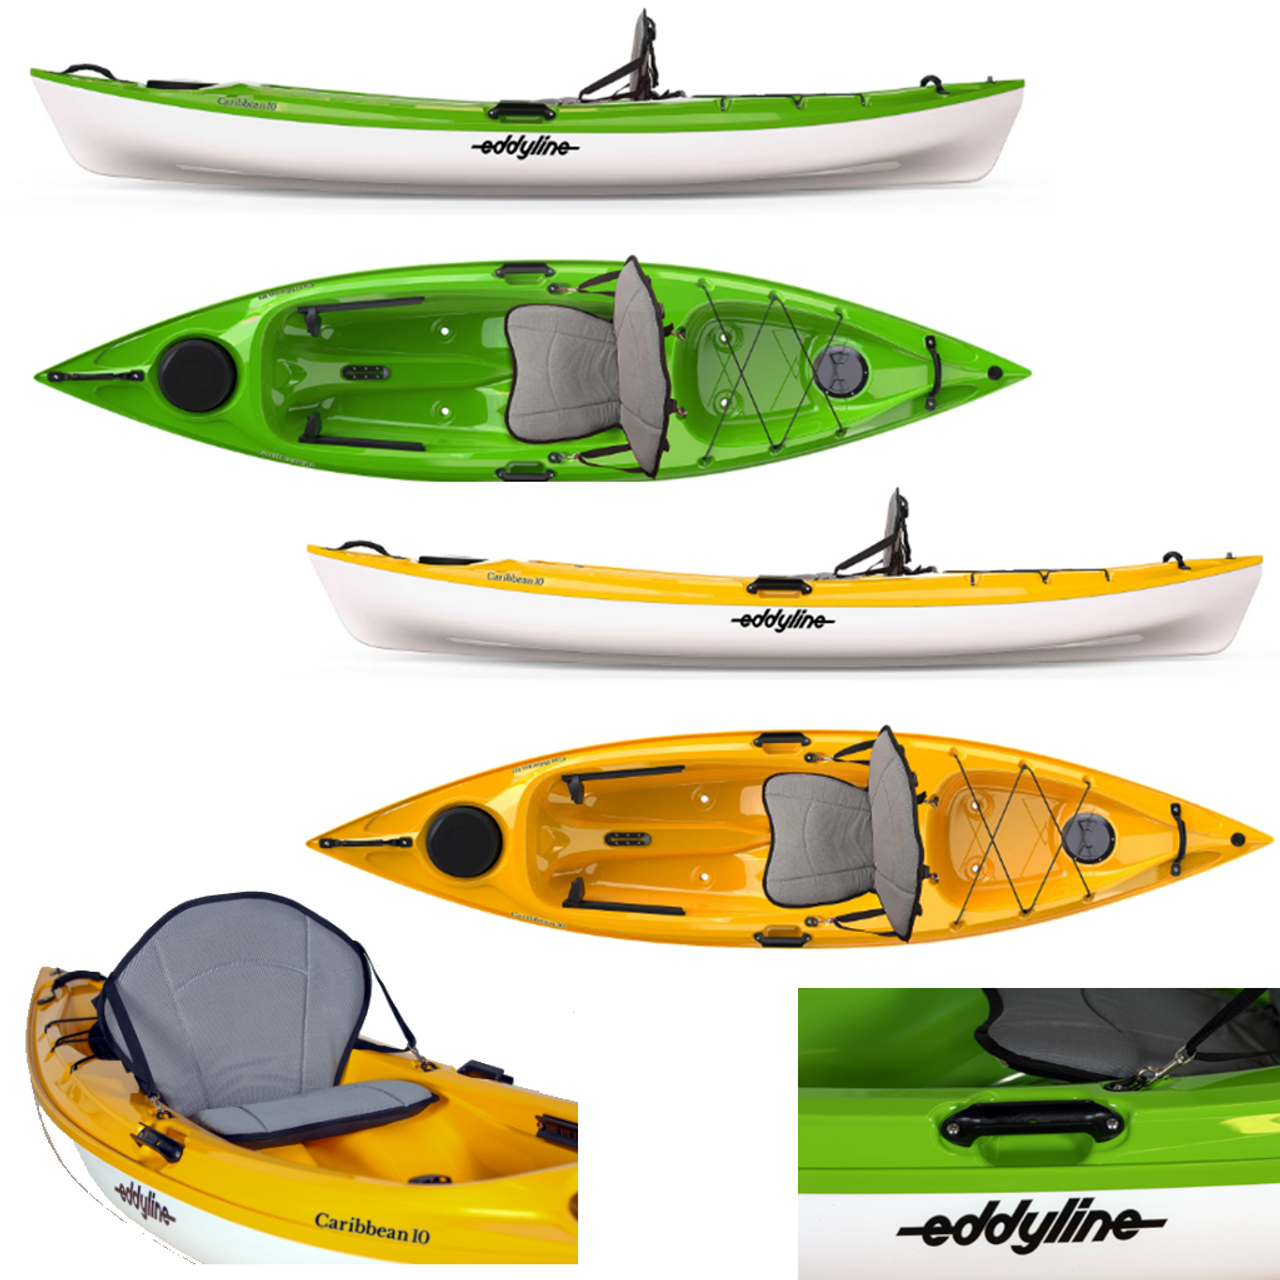 https://cdn11.bigcommerce.com/s-f3xbgyp2hq/images/stencil/1280x1280/products/2819/23617/Eddyline_Caribbean_10_Sit_On_Top_Recreational_Lightweight_Kayak_Kayak_City__86338.1681505189.png?c=2